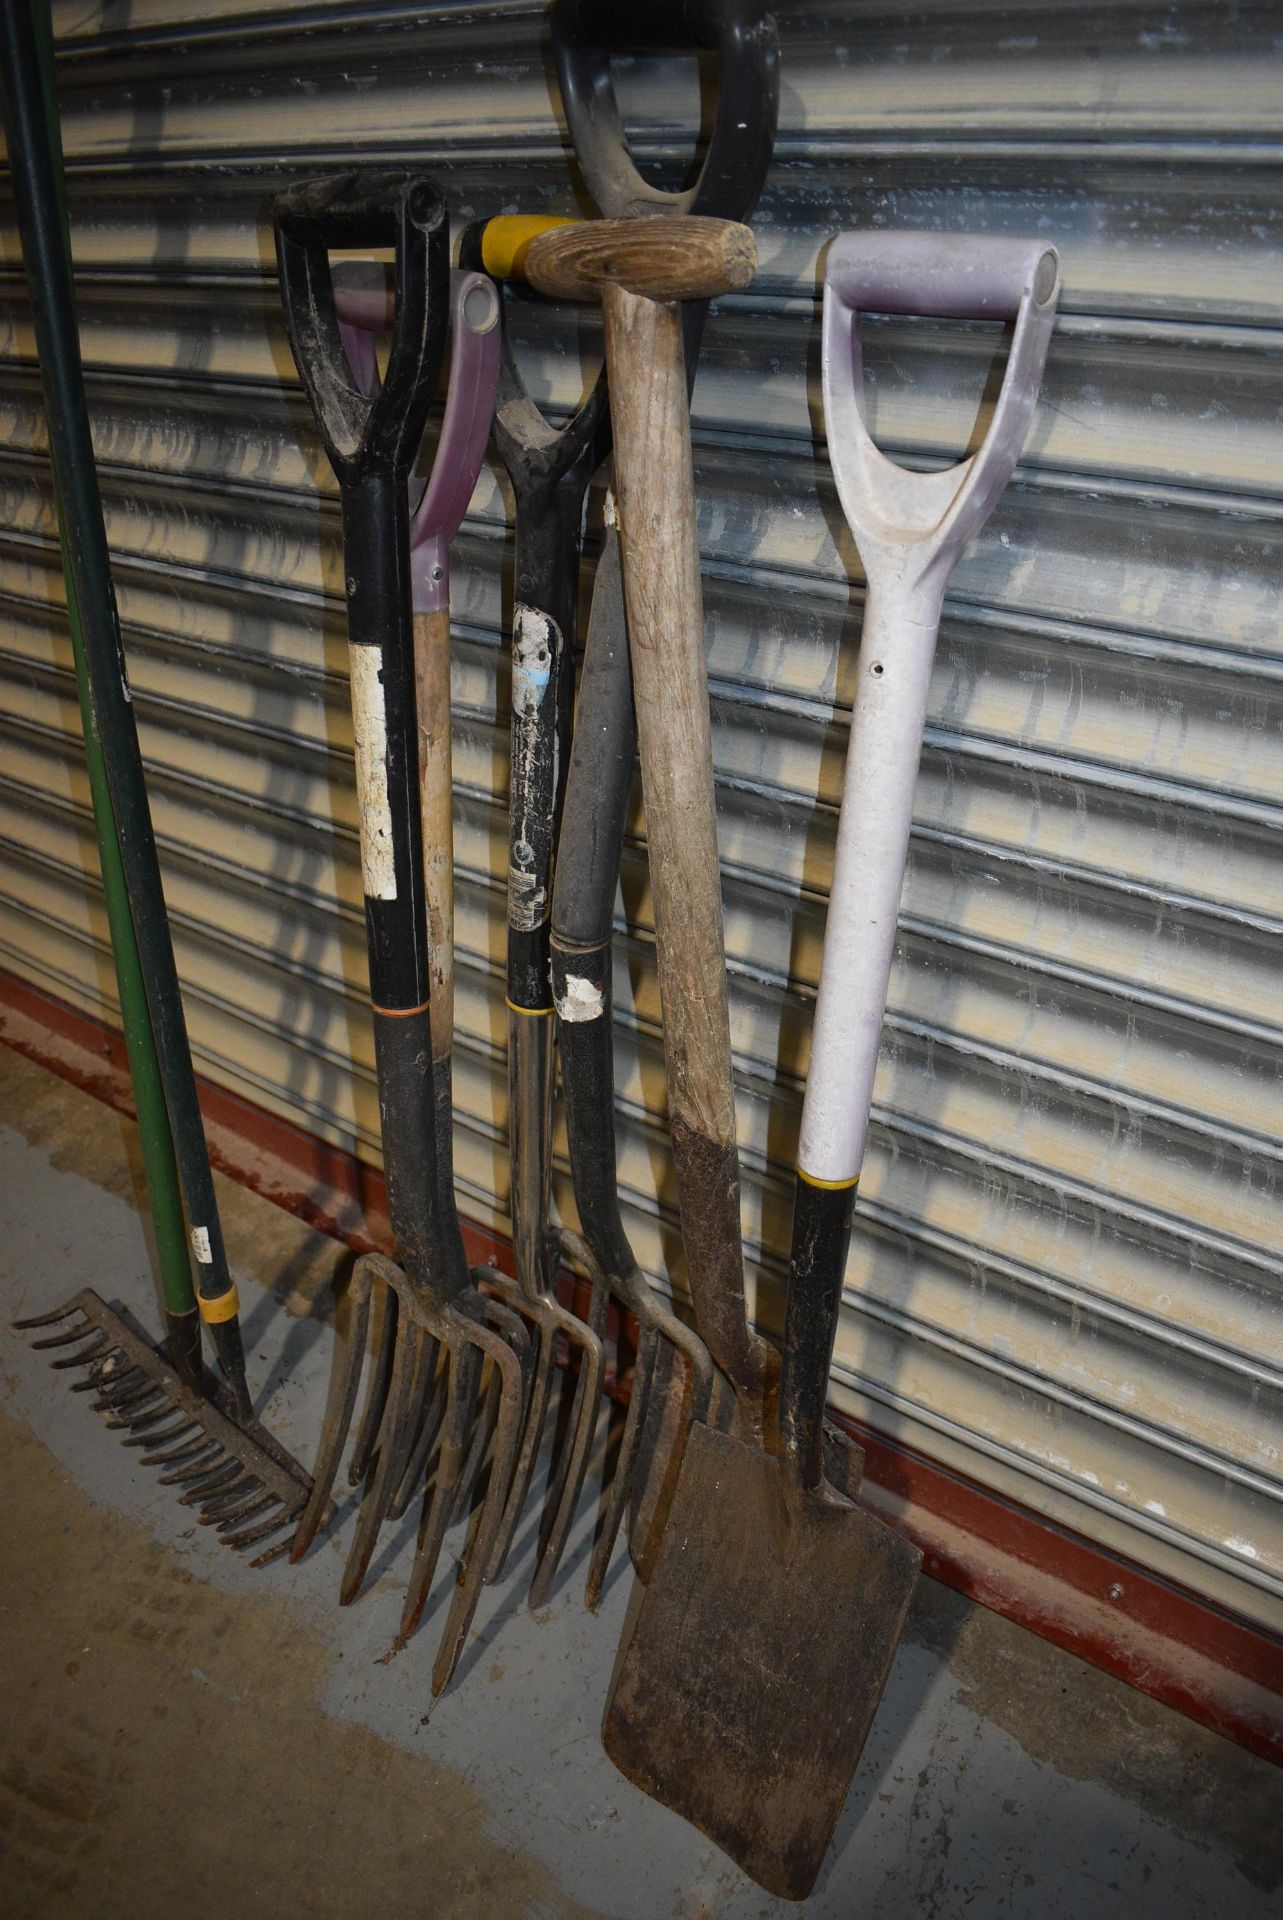 *Garden Tools Including Four Forks, Two Spades, and Two Rakes - Image 2 of 2